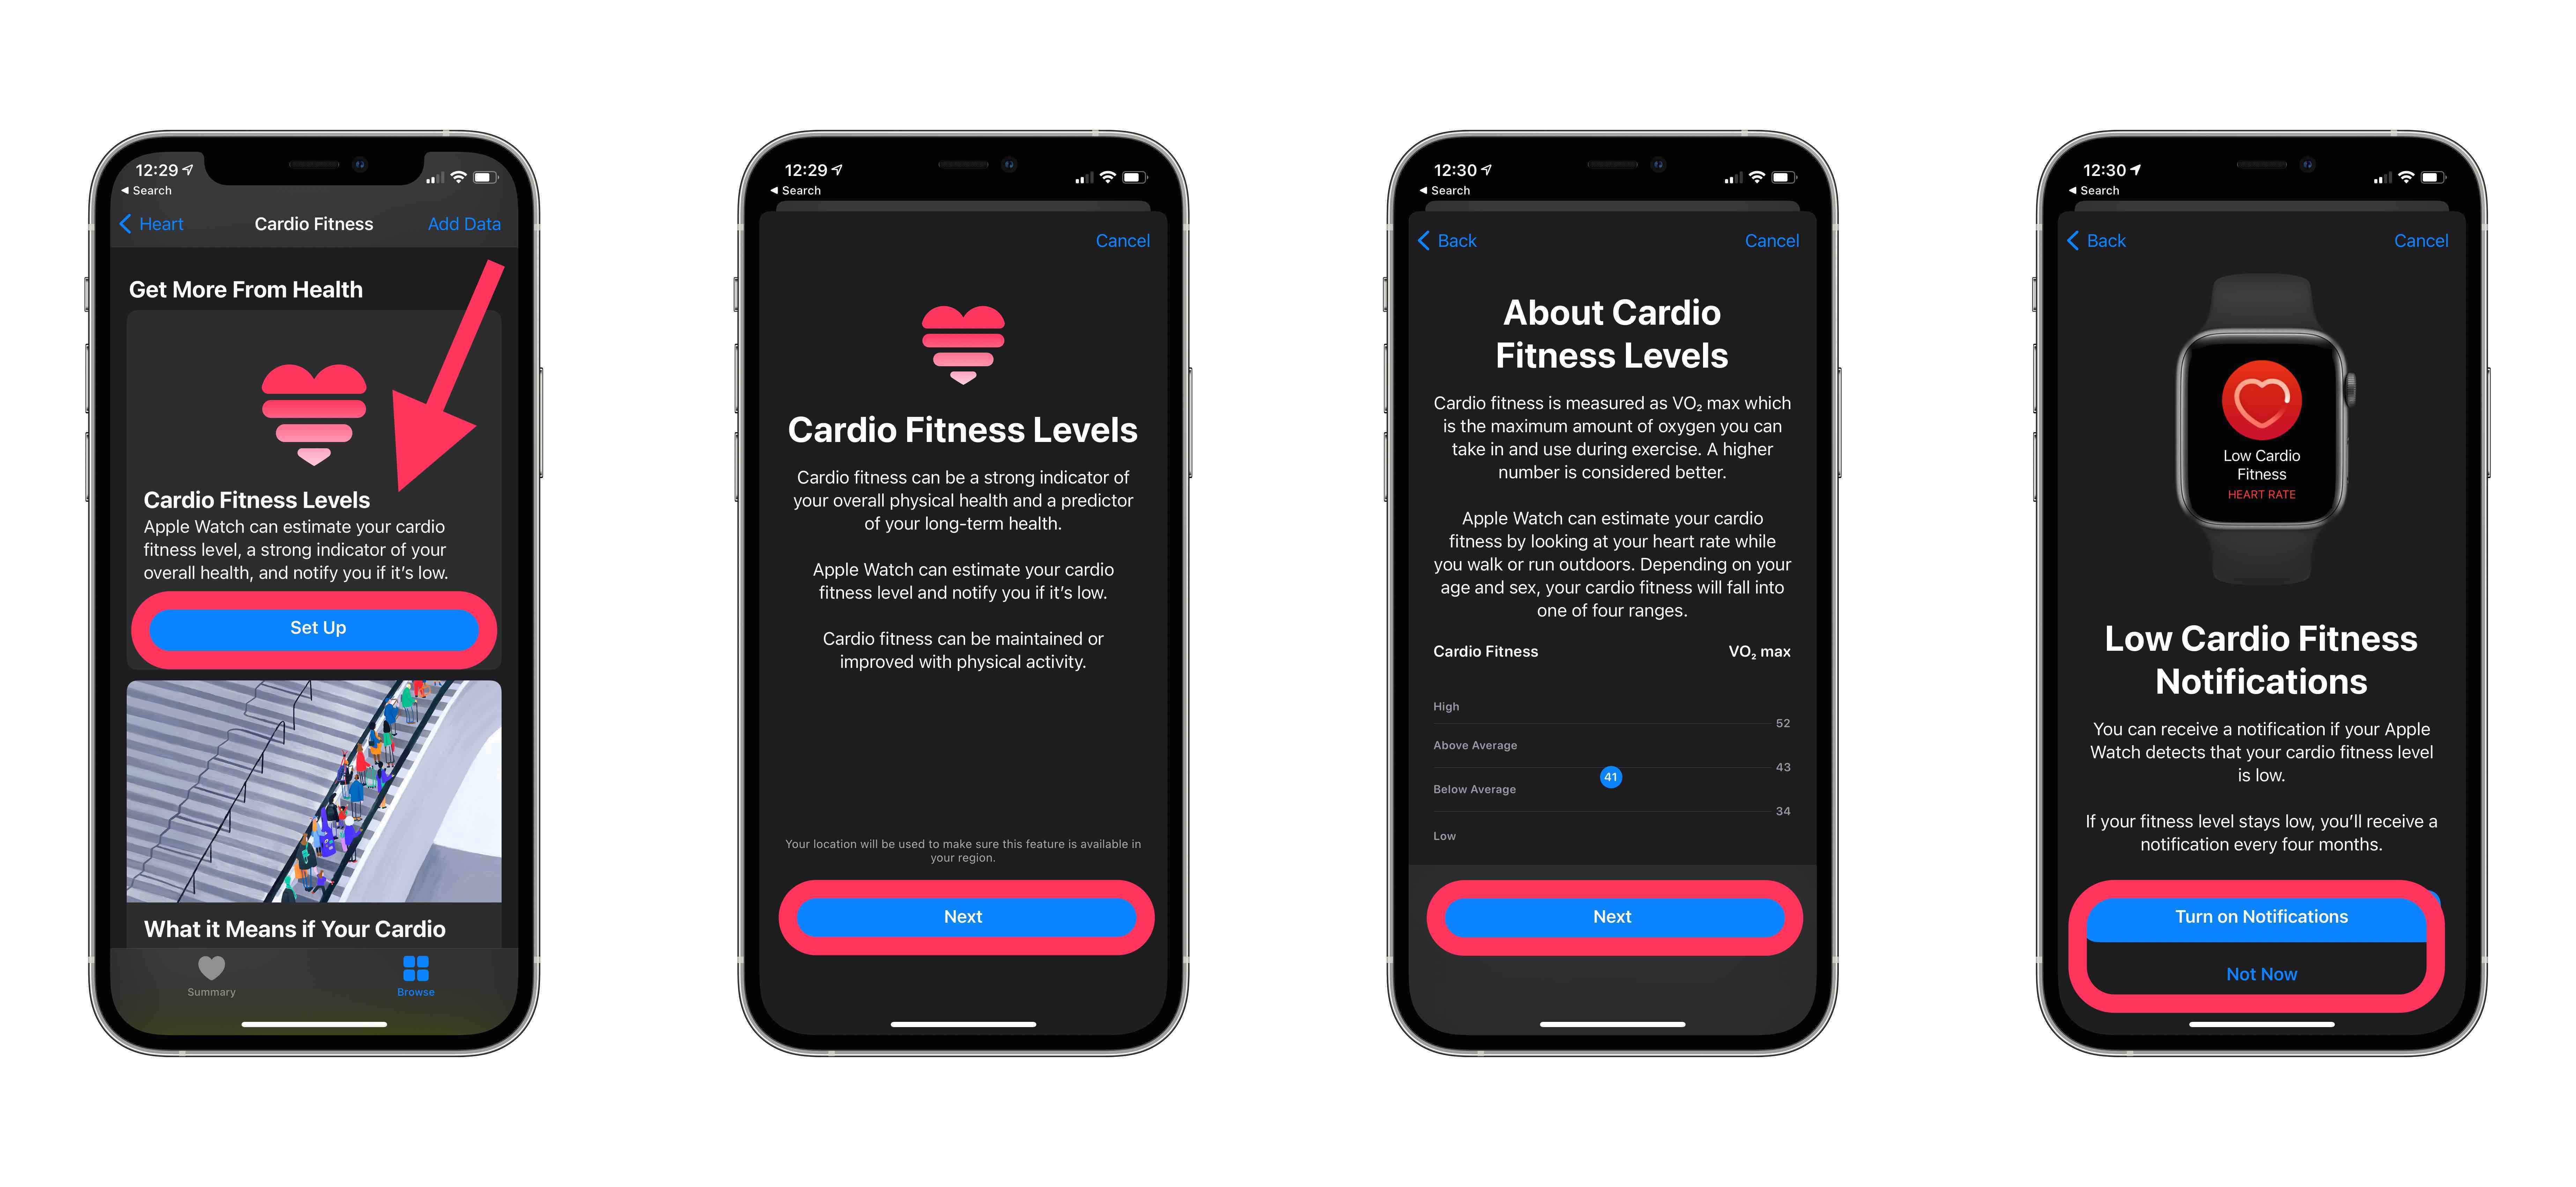 How to use Cardio Fitness on iPhone and Apple Watch 9to5Mac